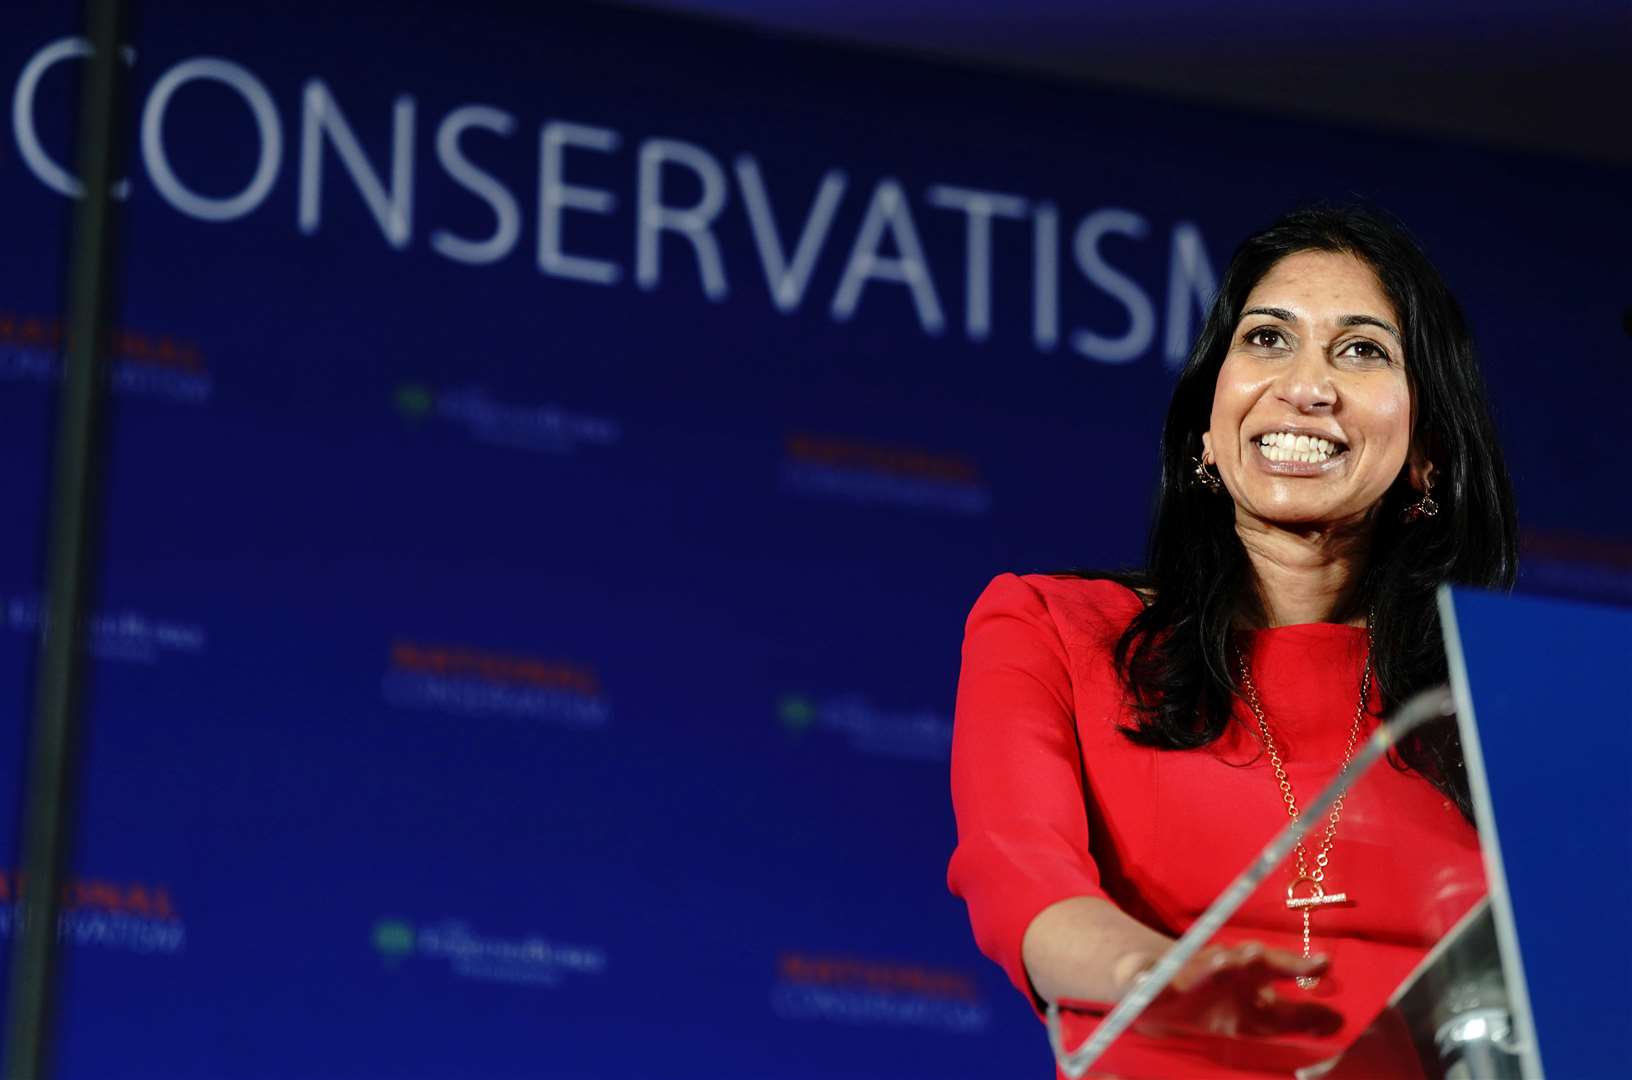 Home Secretary Suella Braverman speaking during the National Conservatism Conference this week (Victoria Jones/PA)